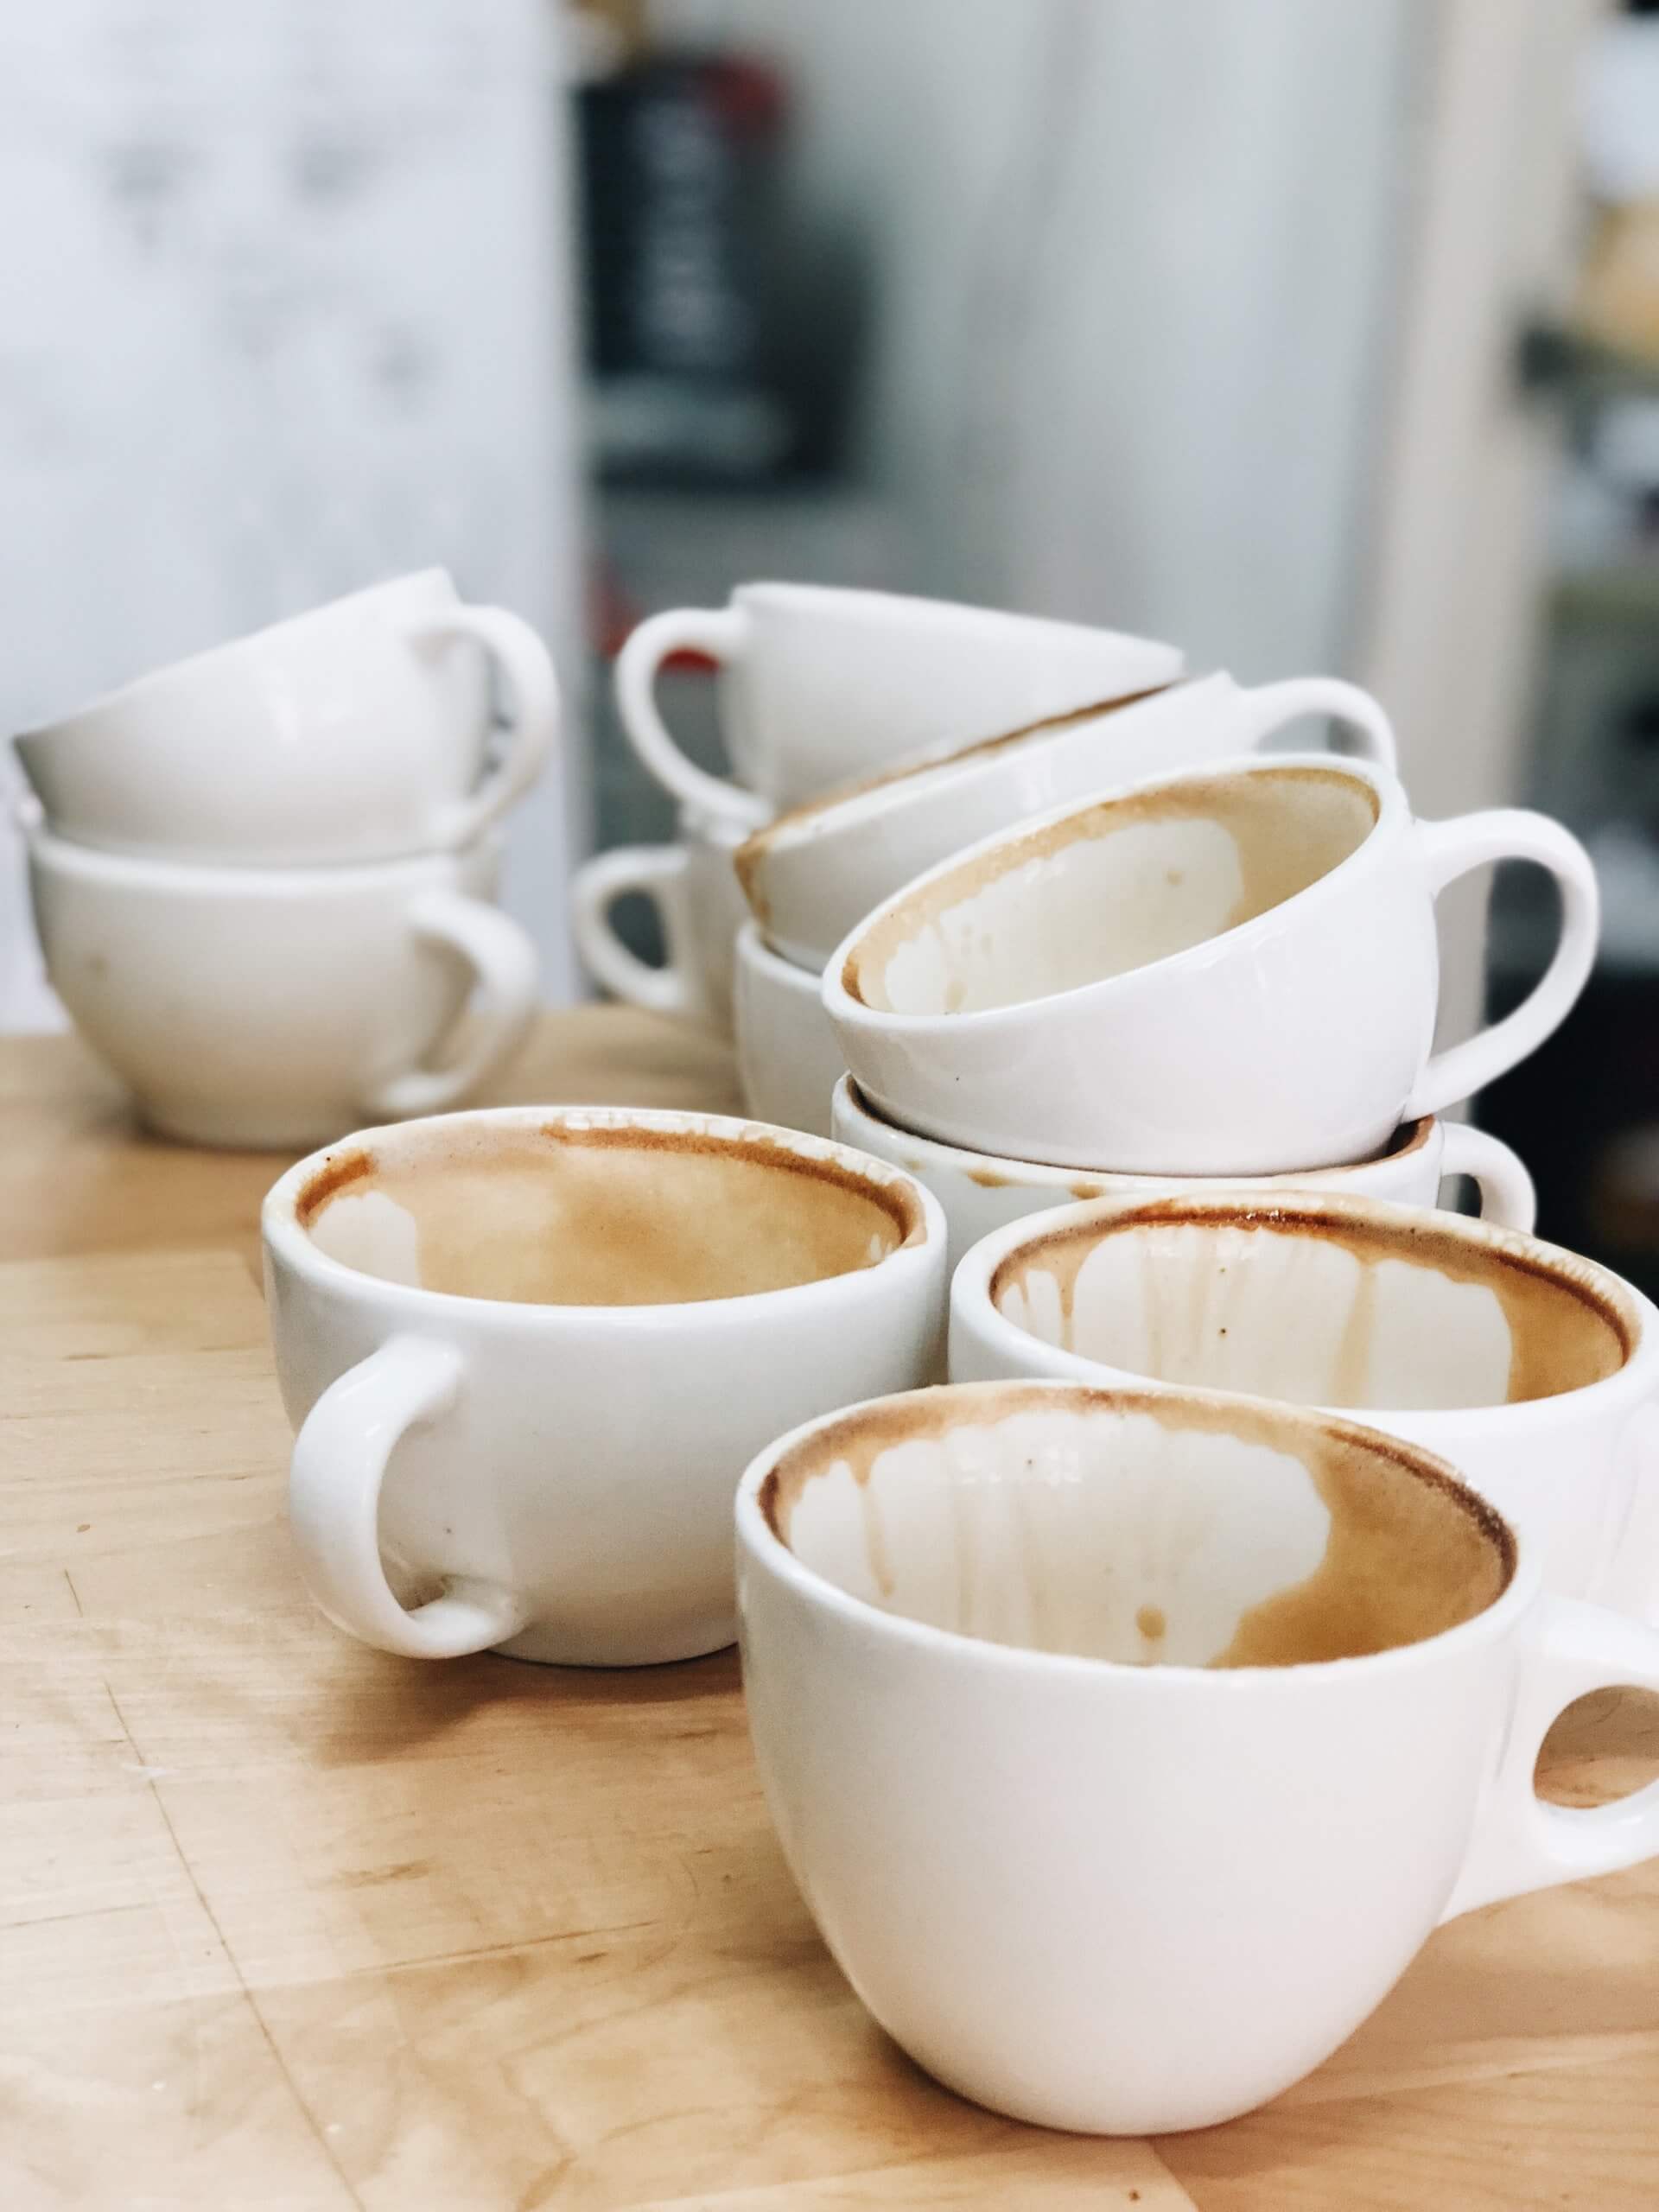 Soiled ceramic teacups to be cleaned in quick dishwash cycle